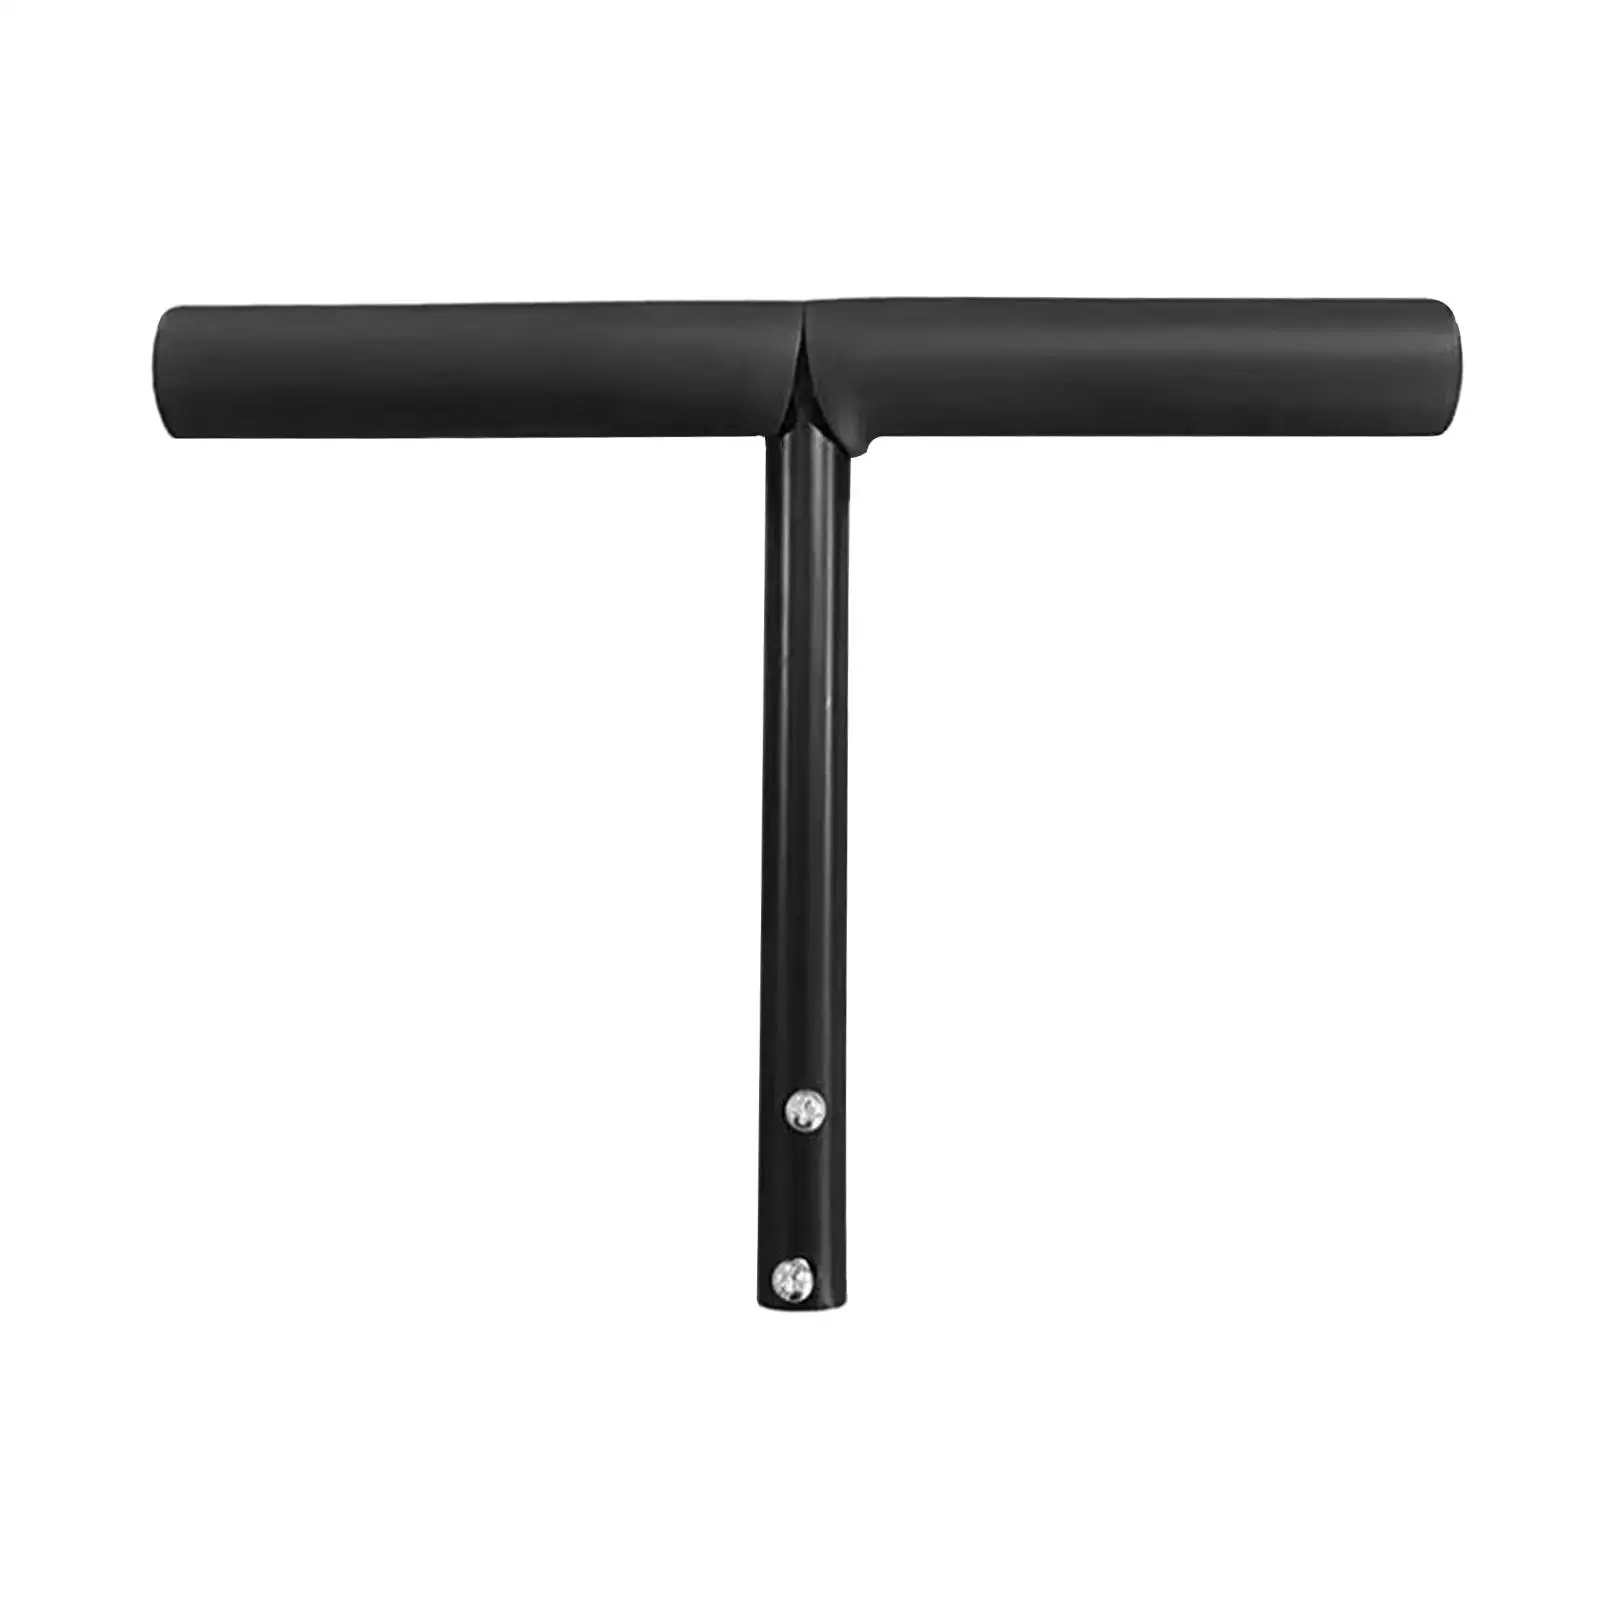 T Shaped Push Handle Bar, Replacement Parts, Practical, Durable, Baby Bike Accessory